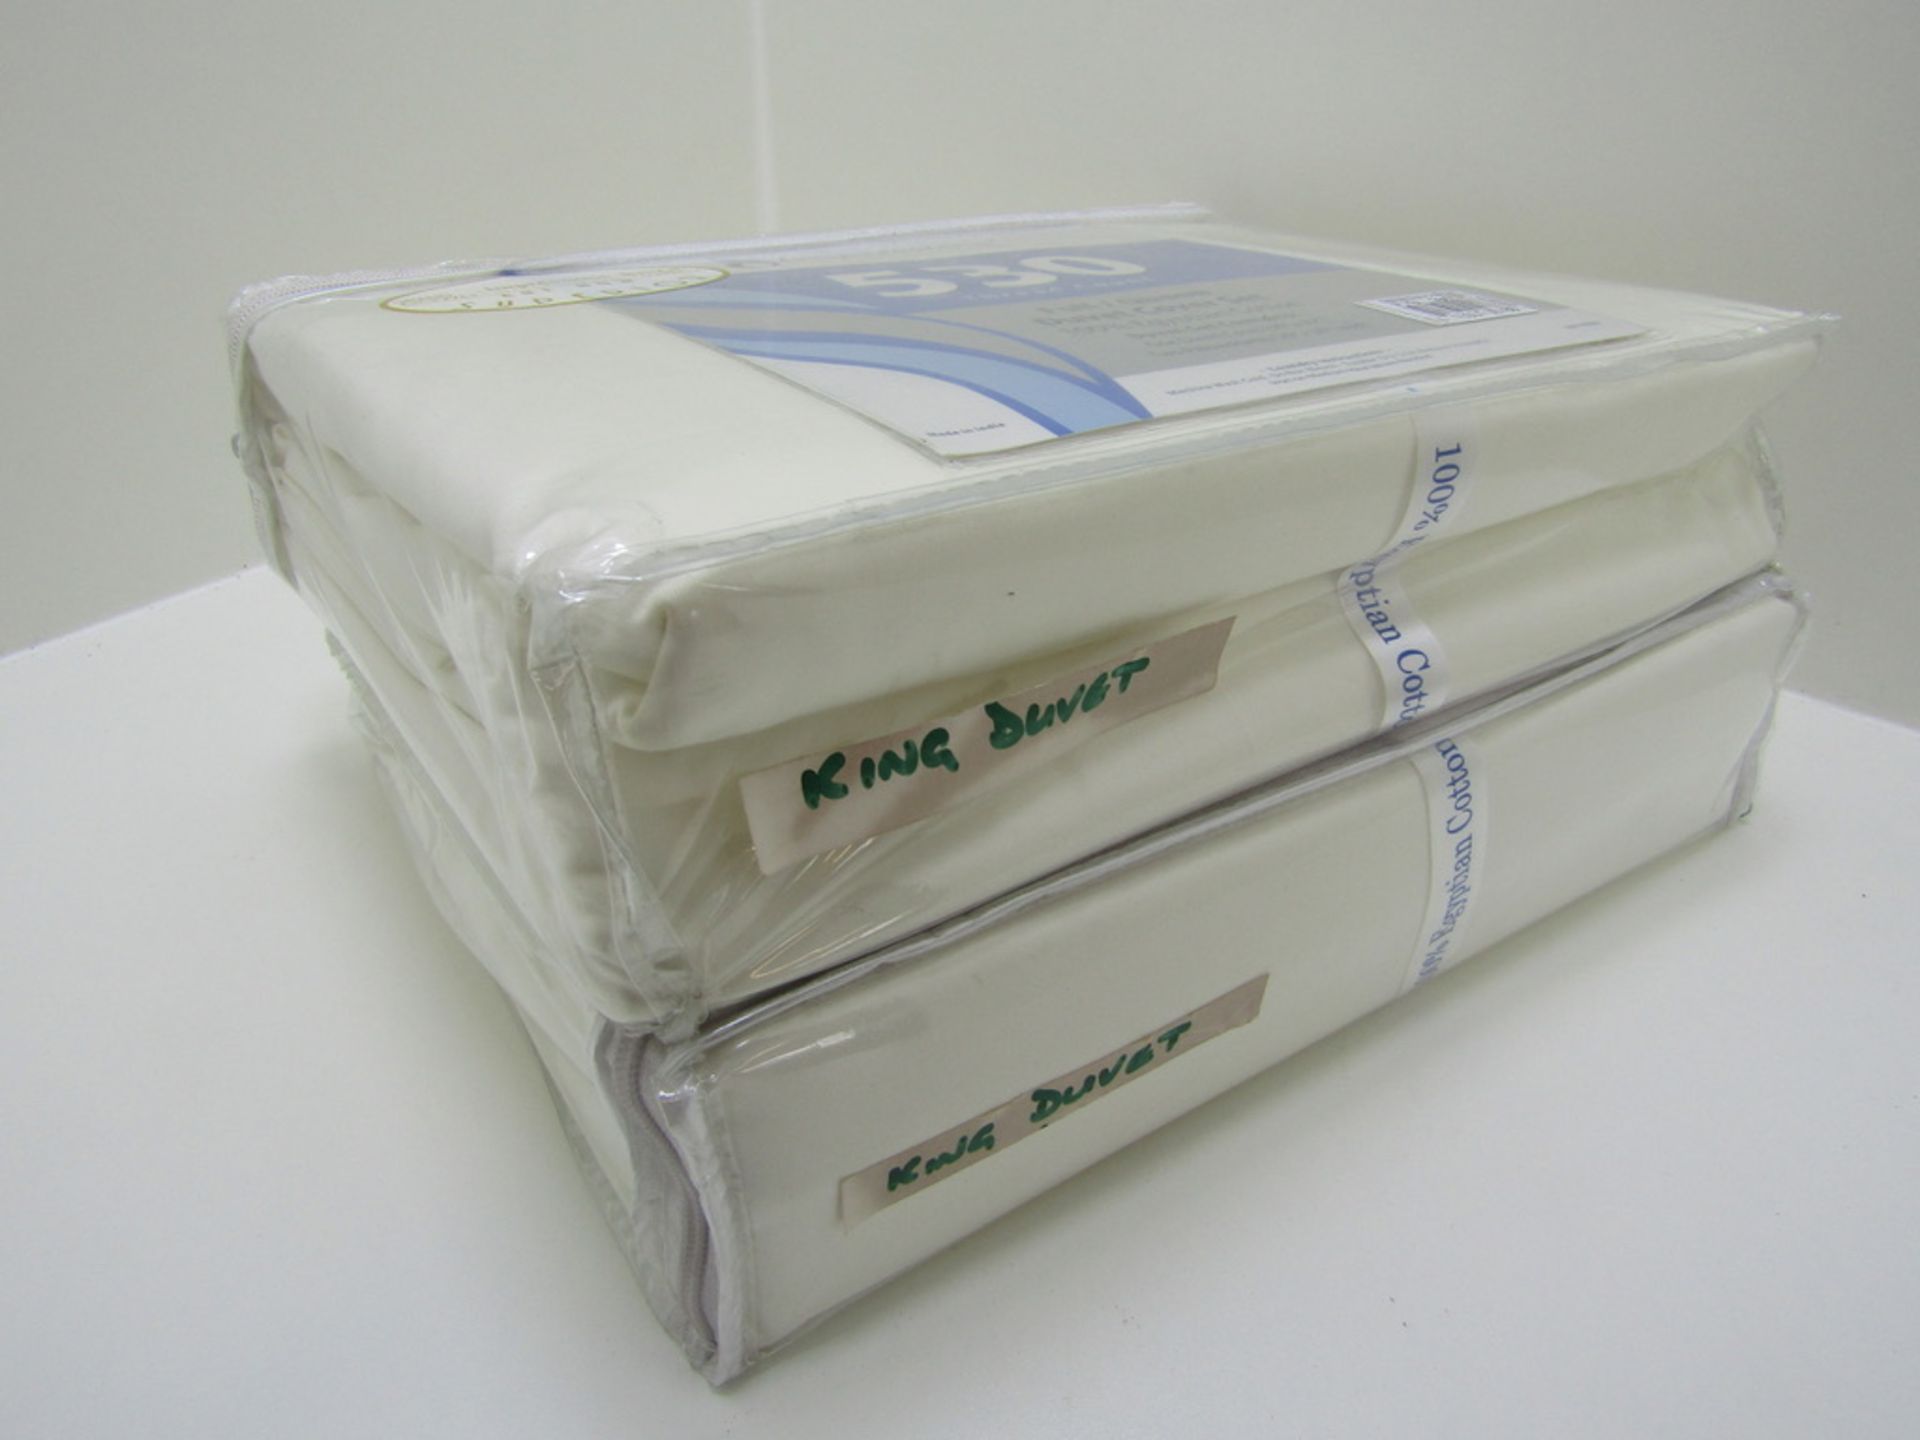 2x Duvet Cover Sets. King size. Ivory solid - Image 3 of 3